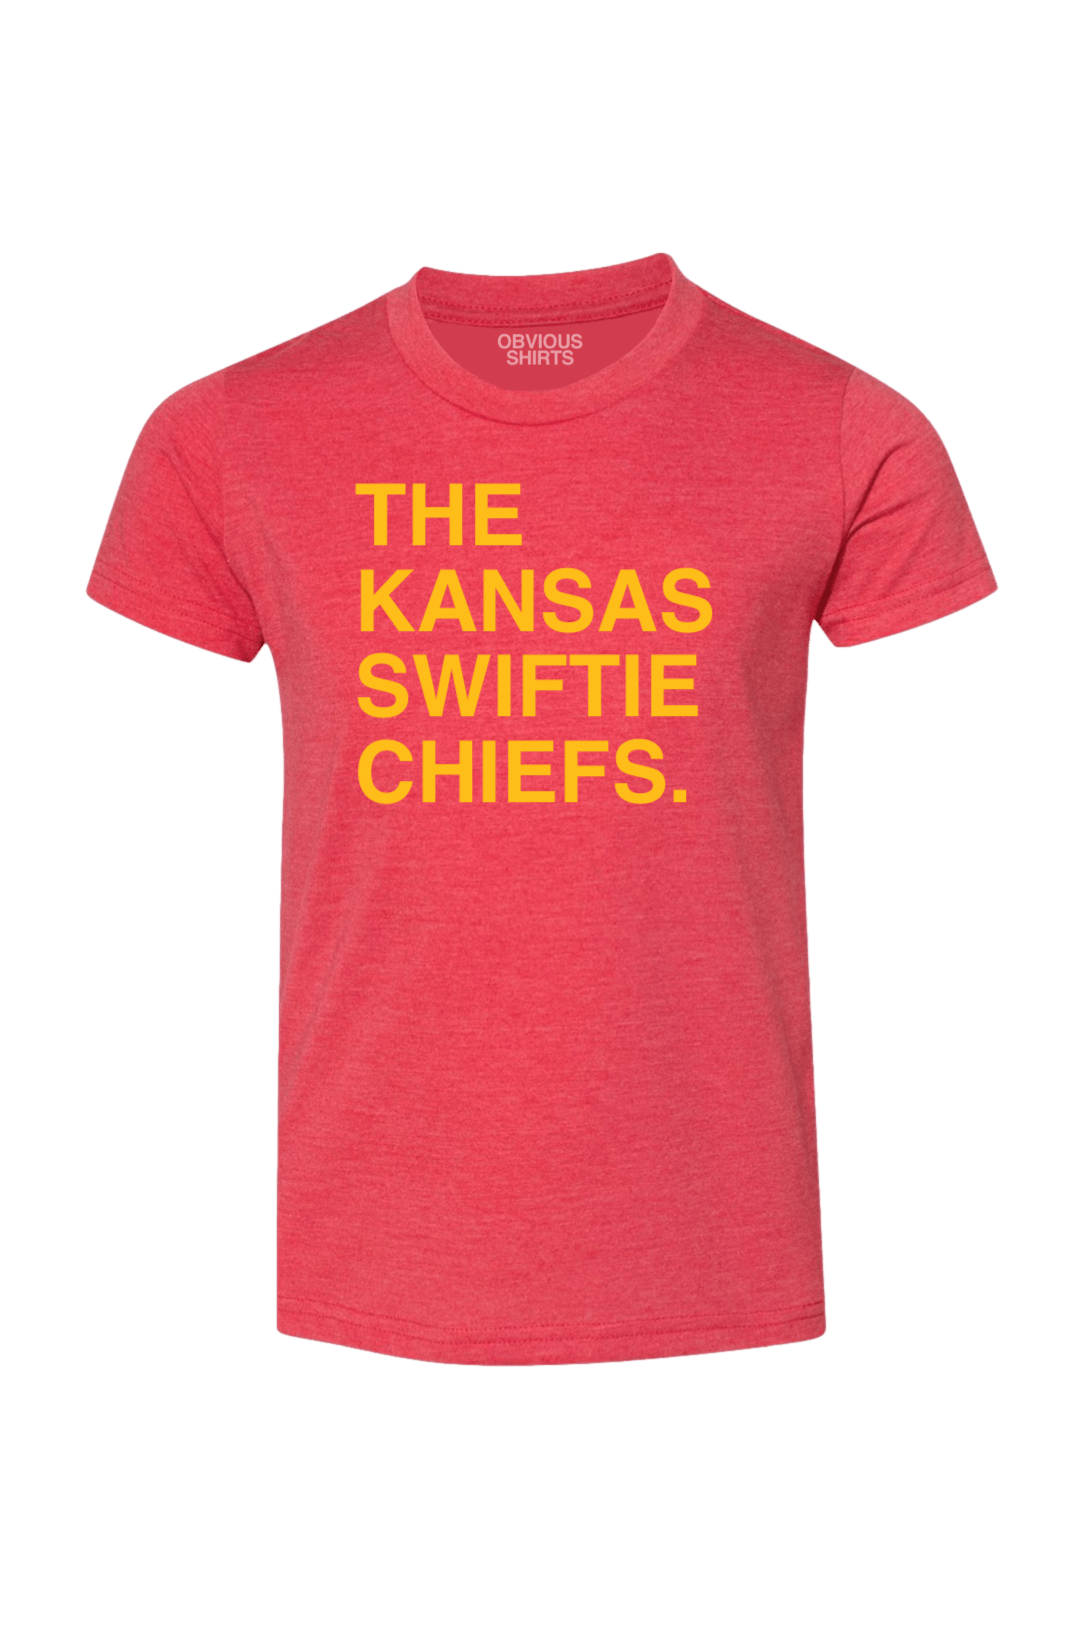 THE KANSAS SWIFTIE CHIEFS. (YOUTH) - OBVIOUS SHIRTS